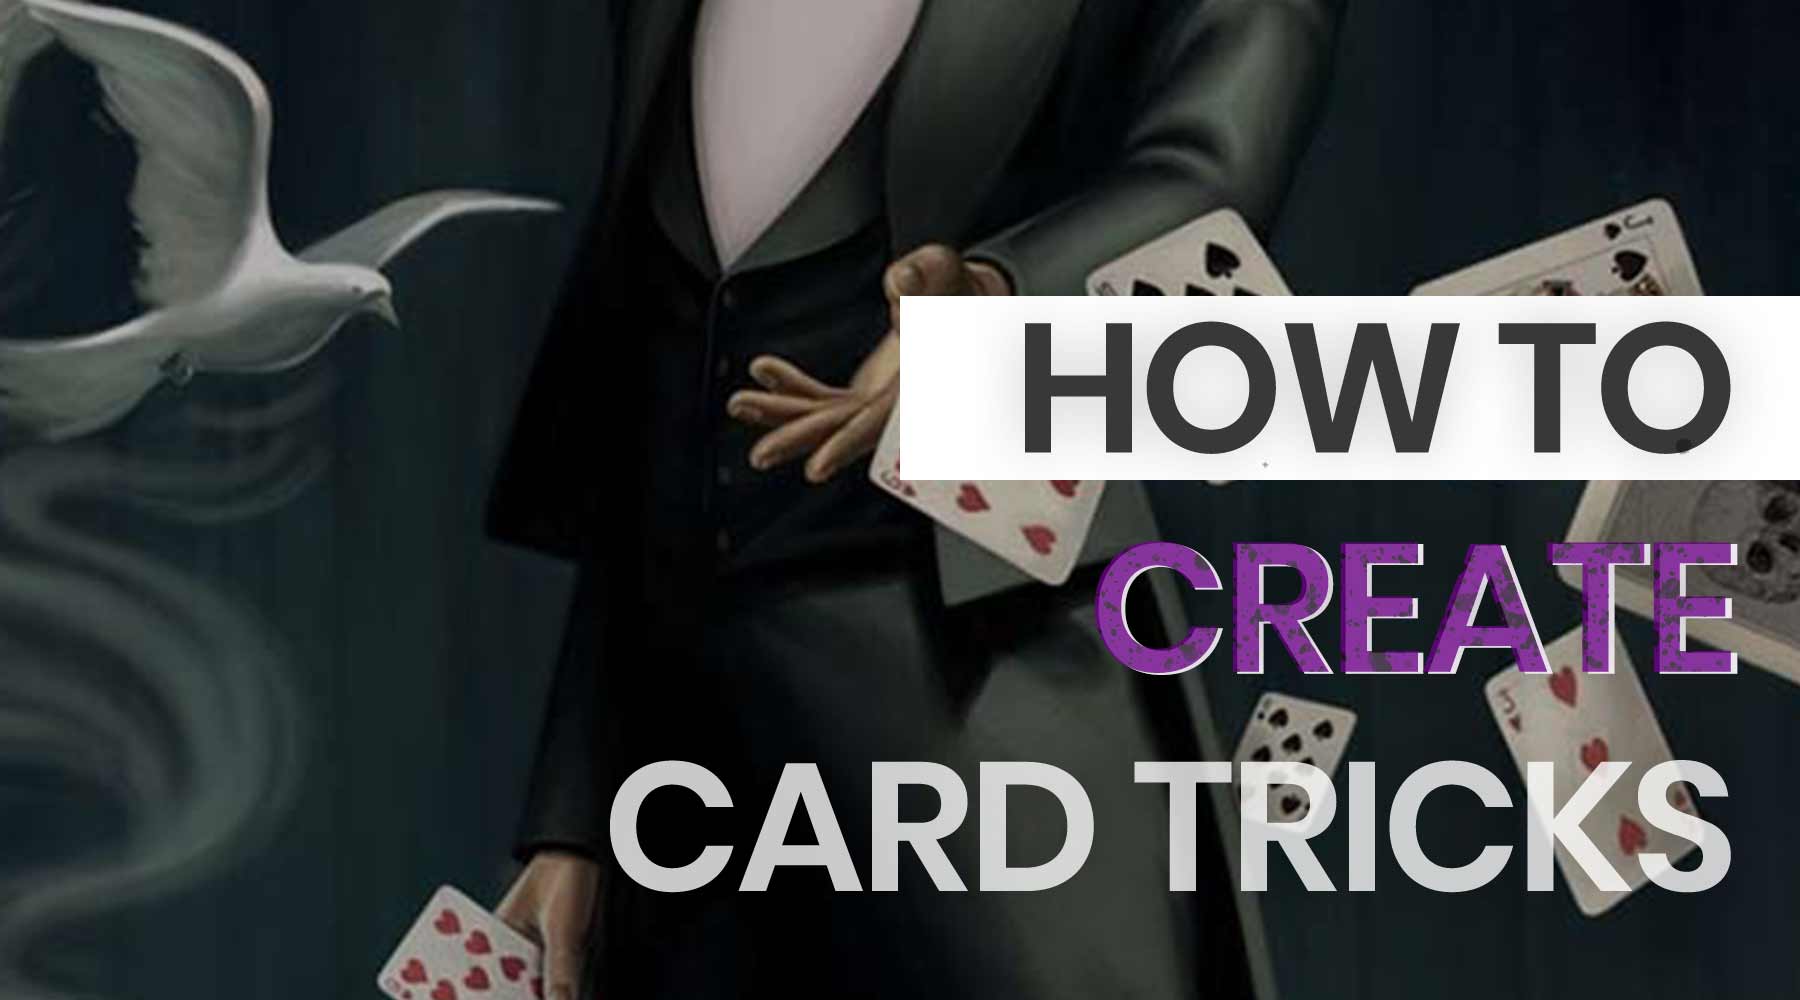 How to create new card tricks